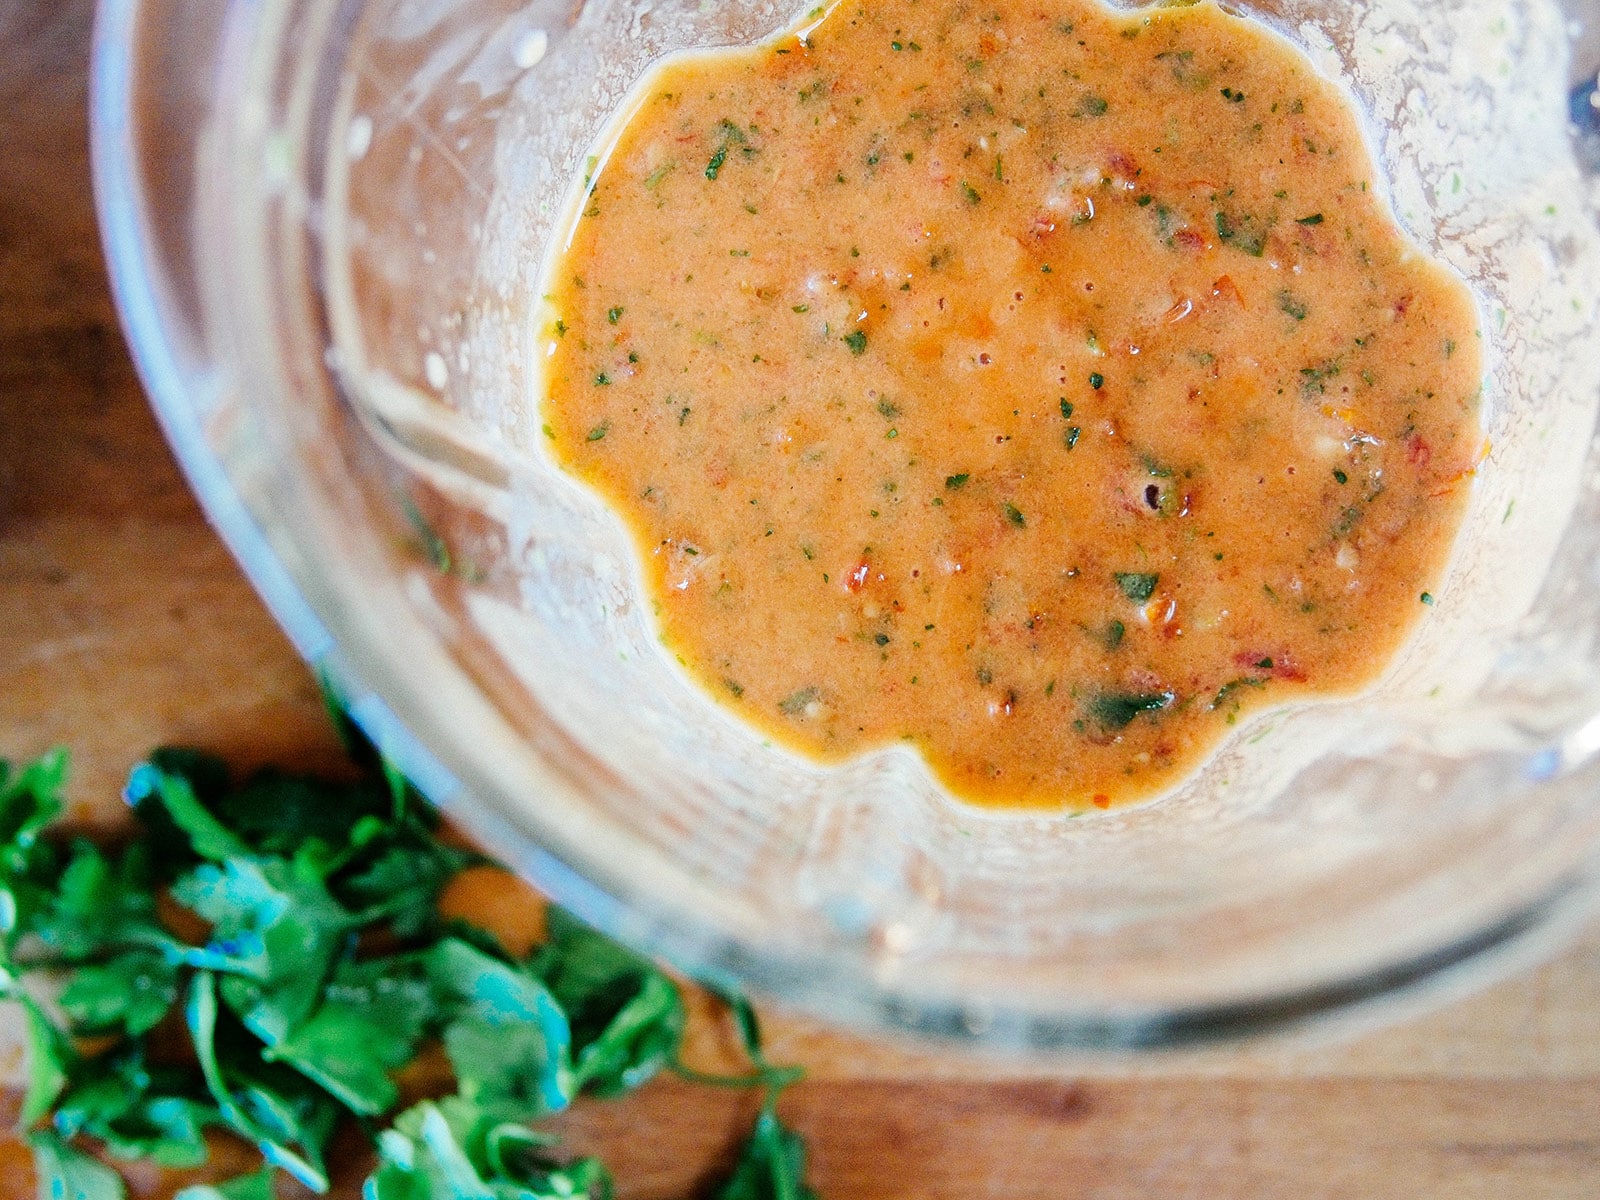 Puree tomatoes, parsley, mint, garlic, and olive oil in a blender